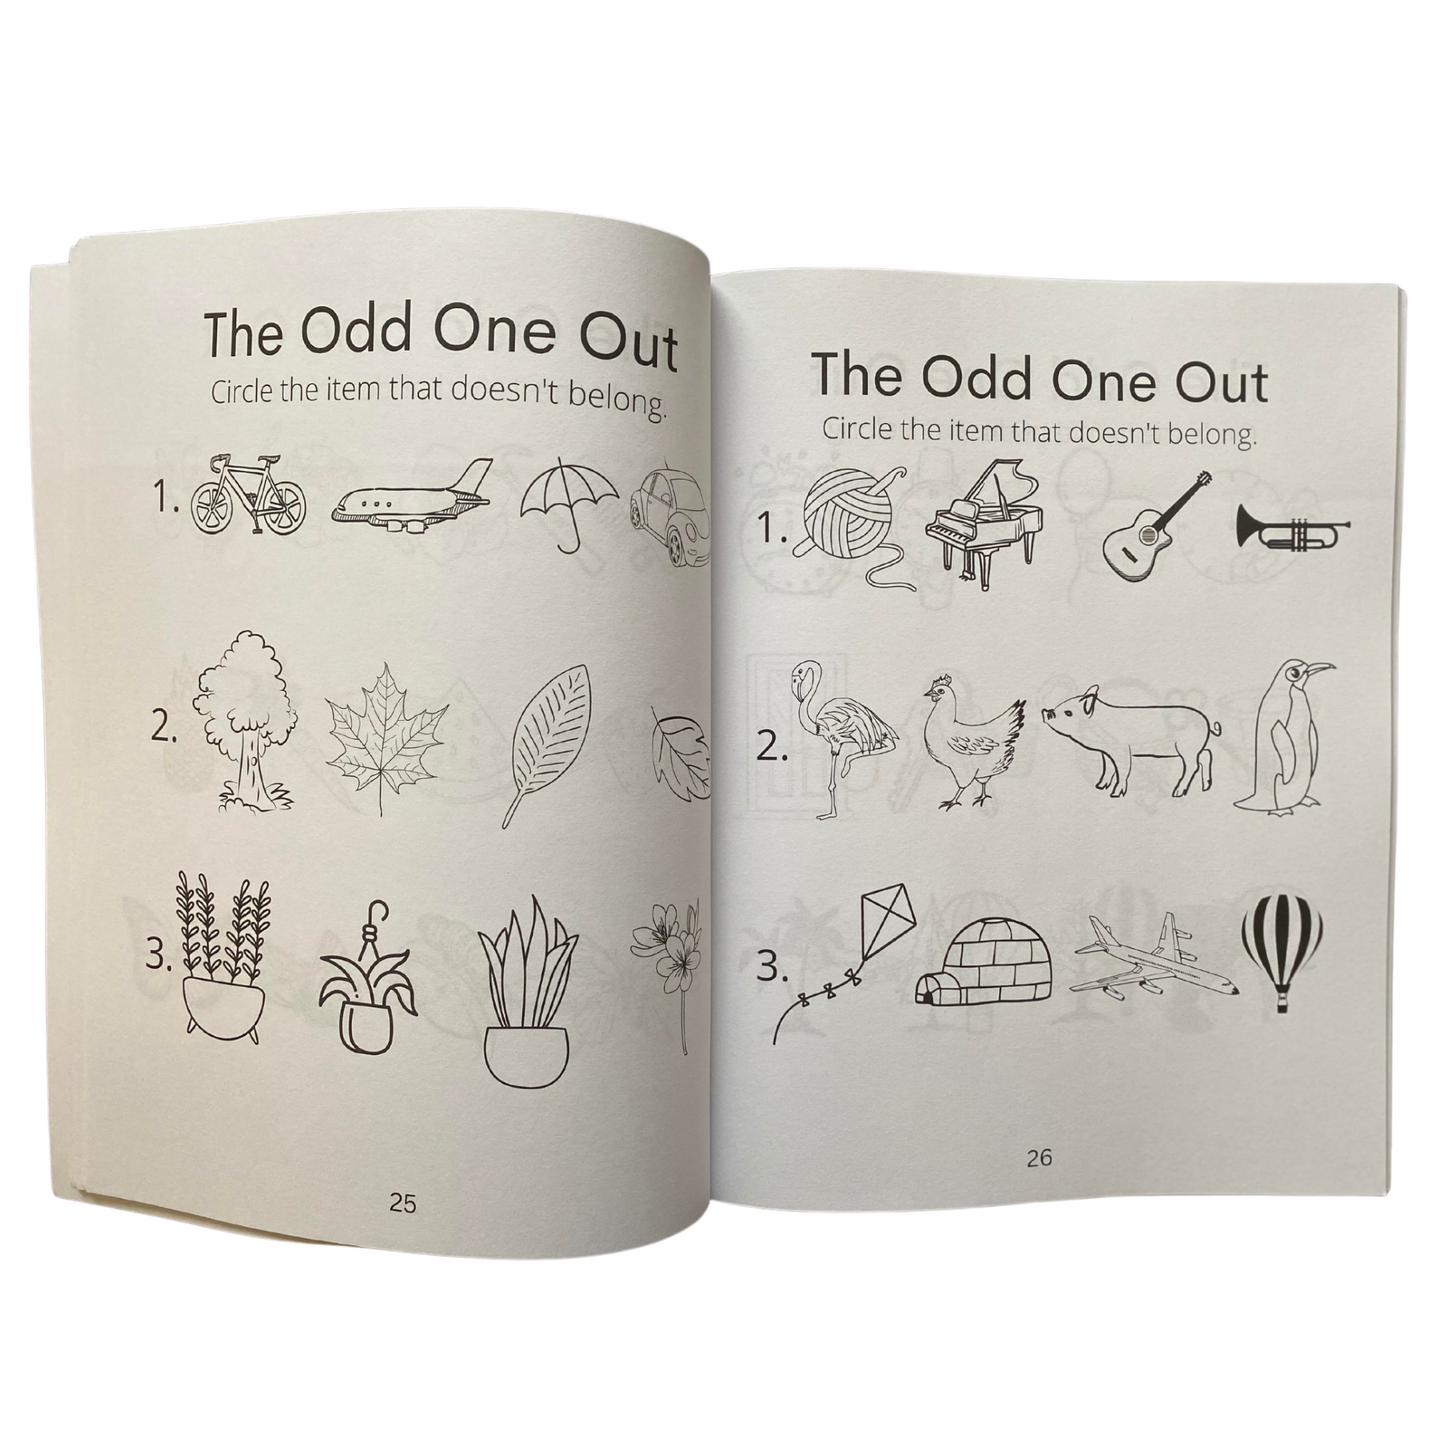 activity book for seniors with dementia or alzheimers